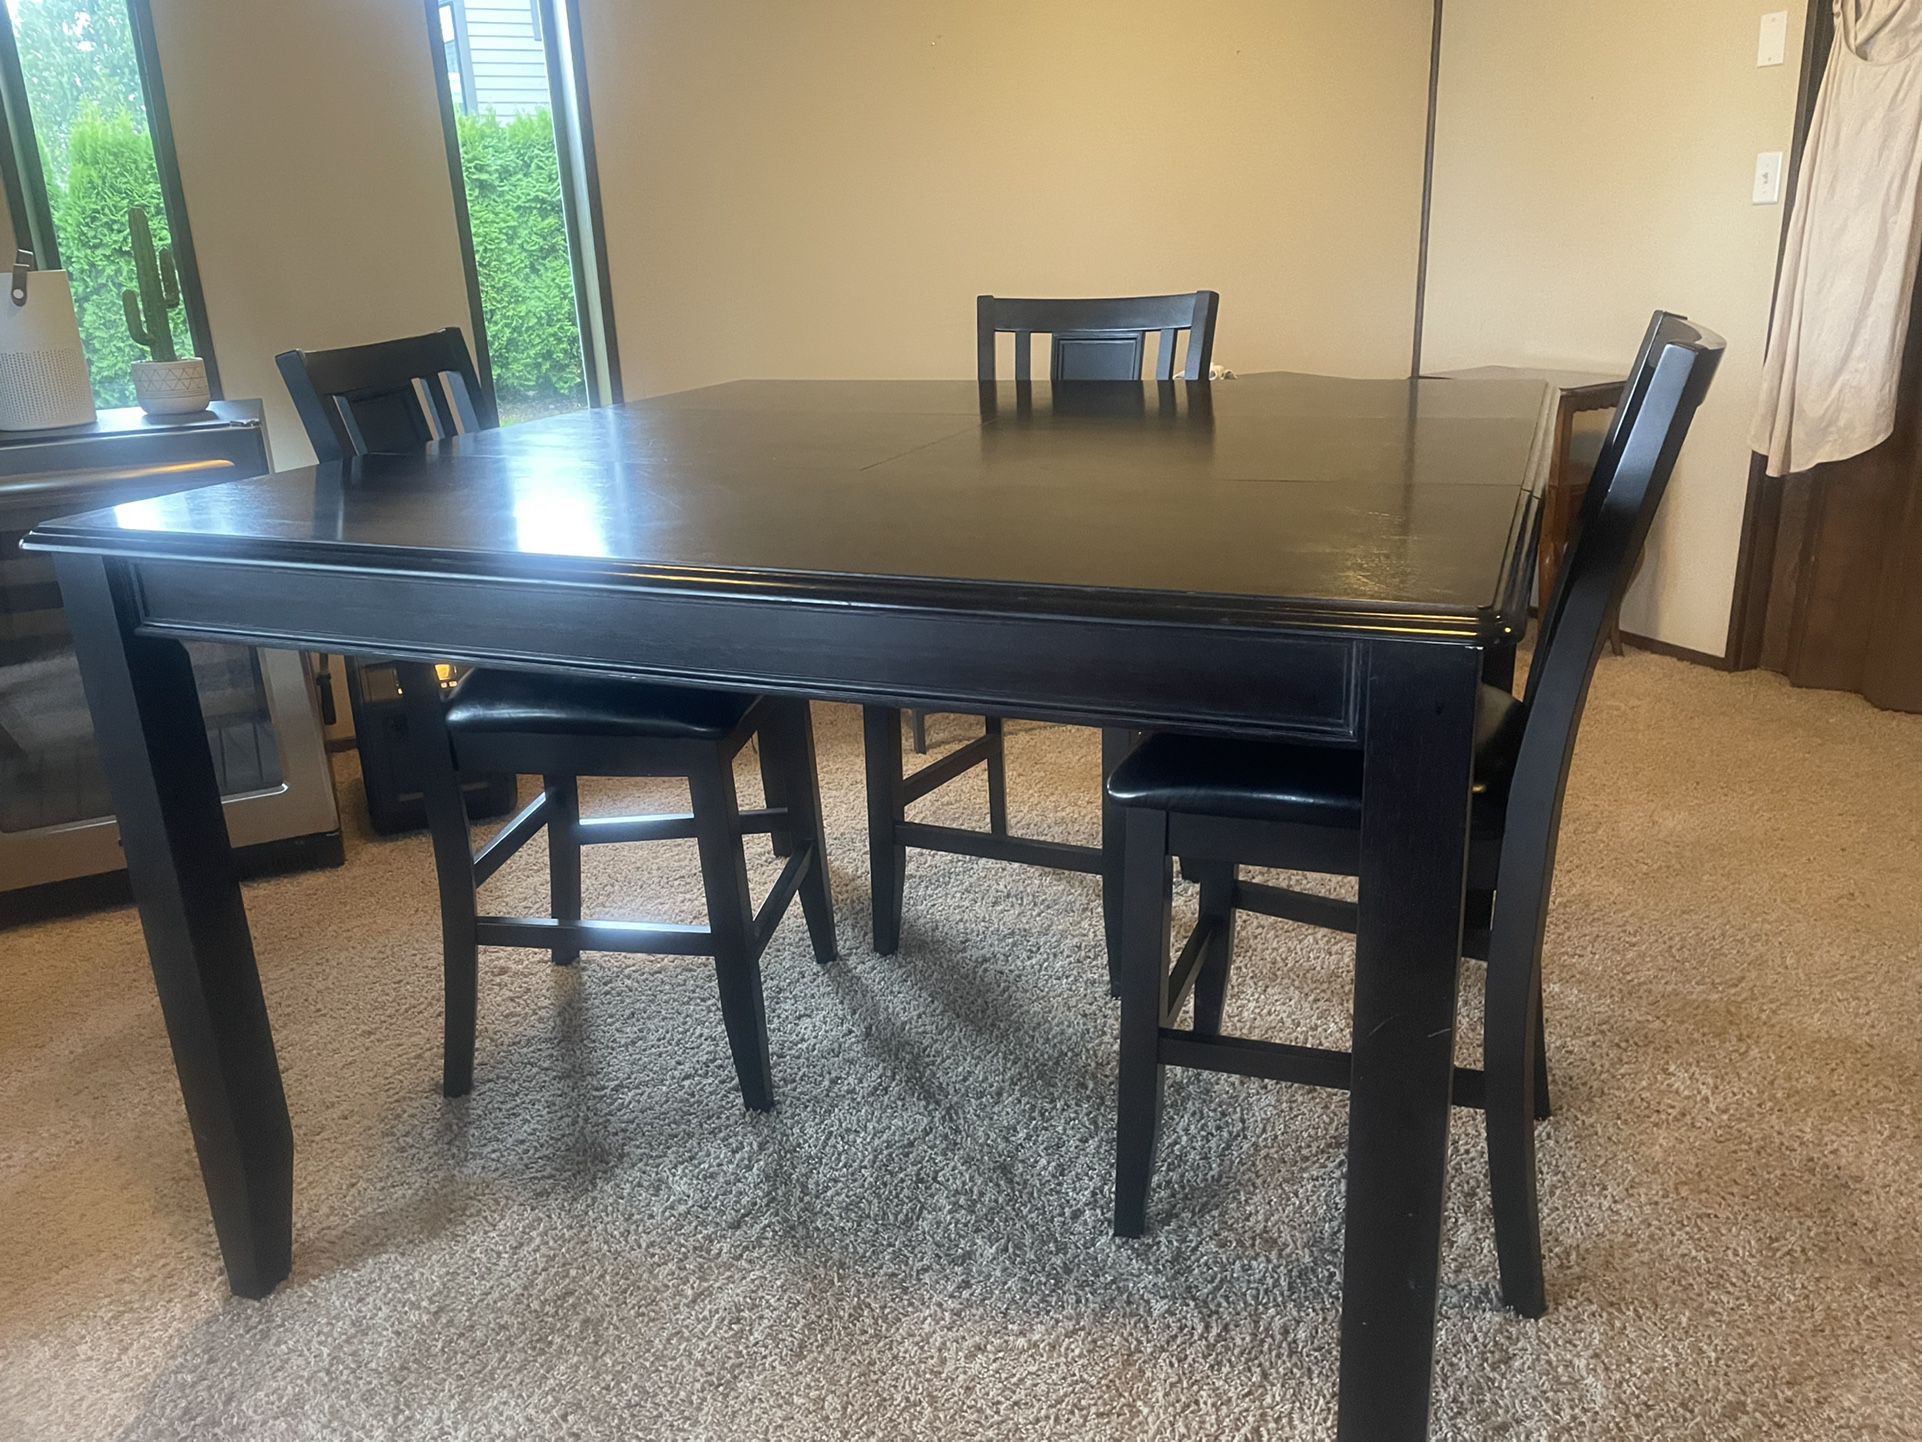 Dining Table W/6 Chairs